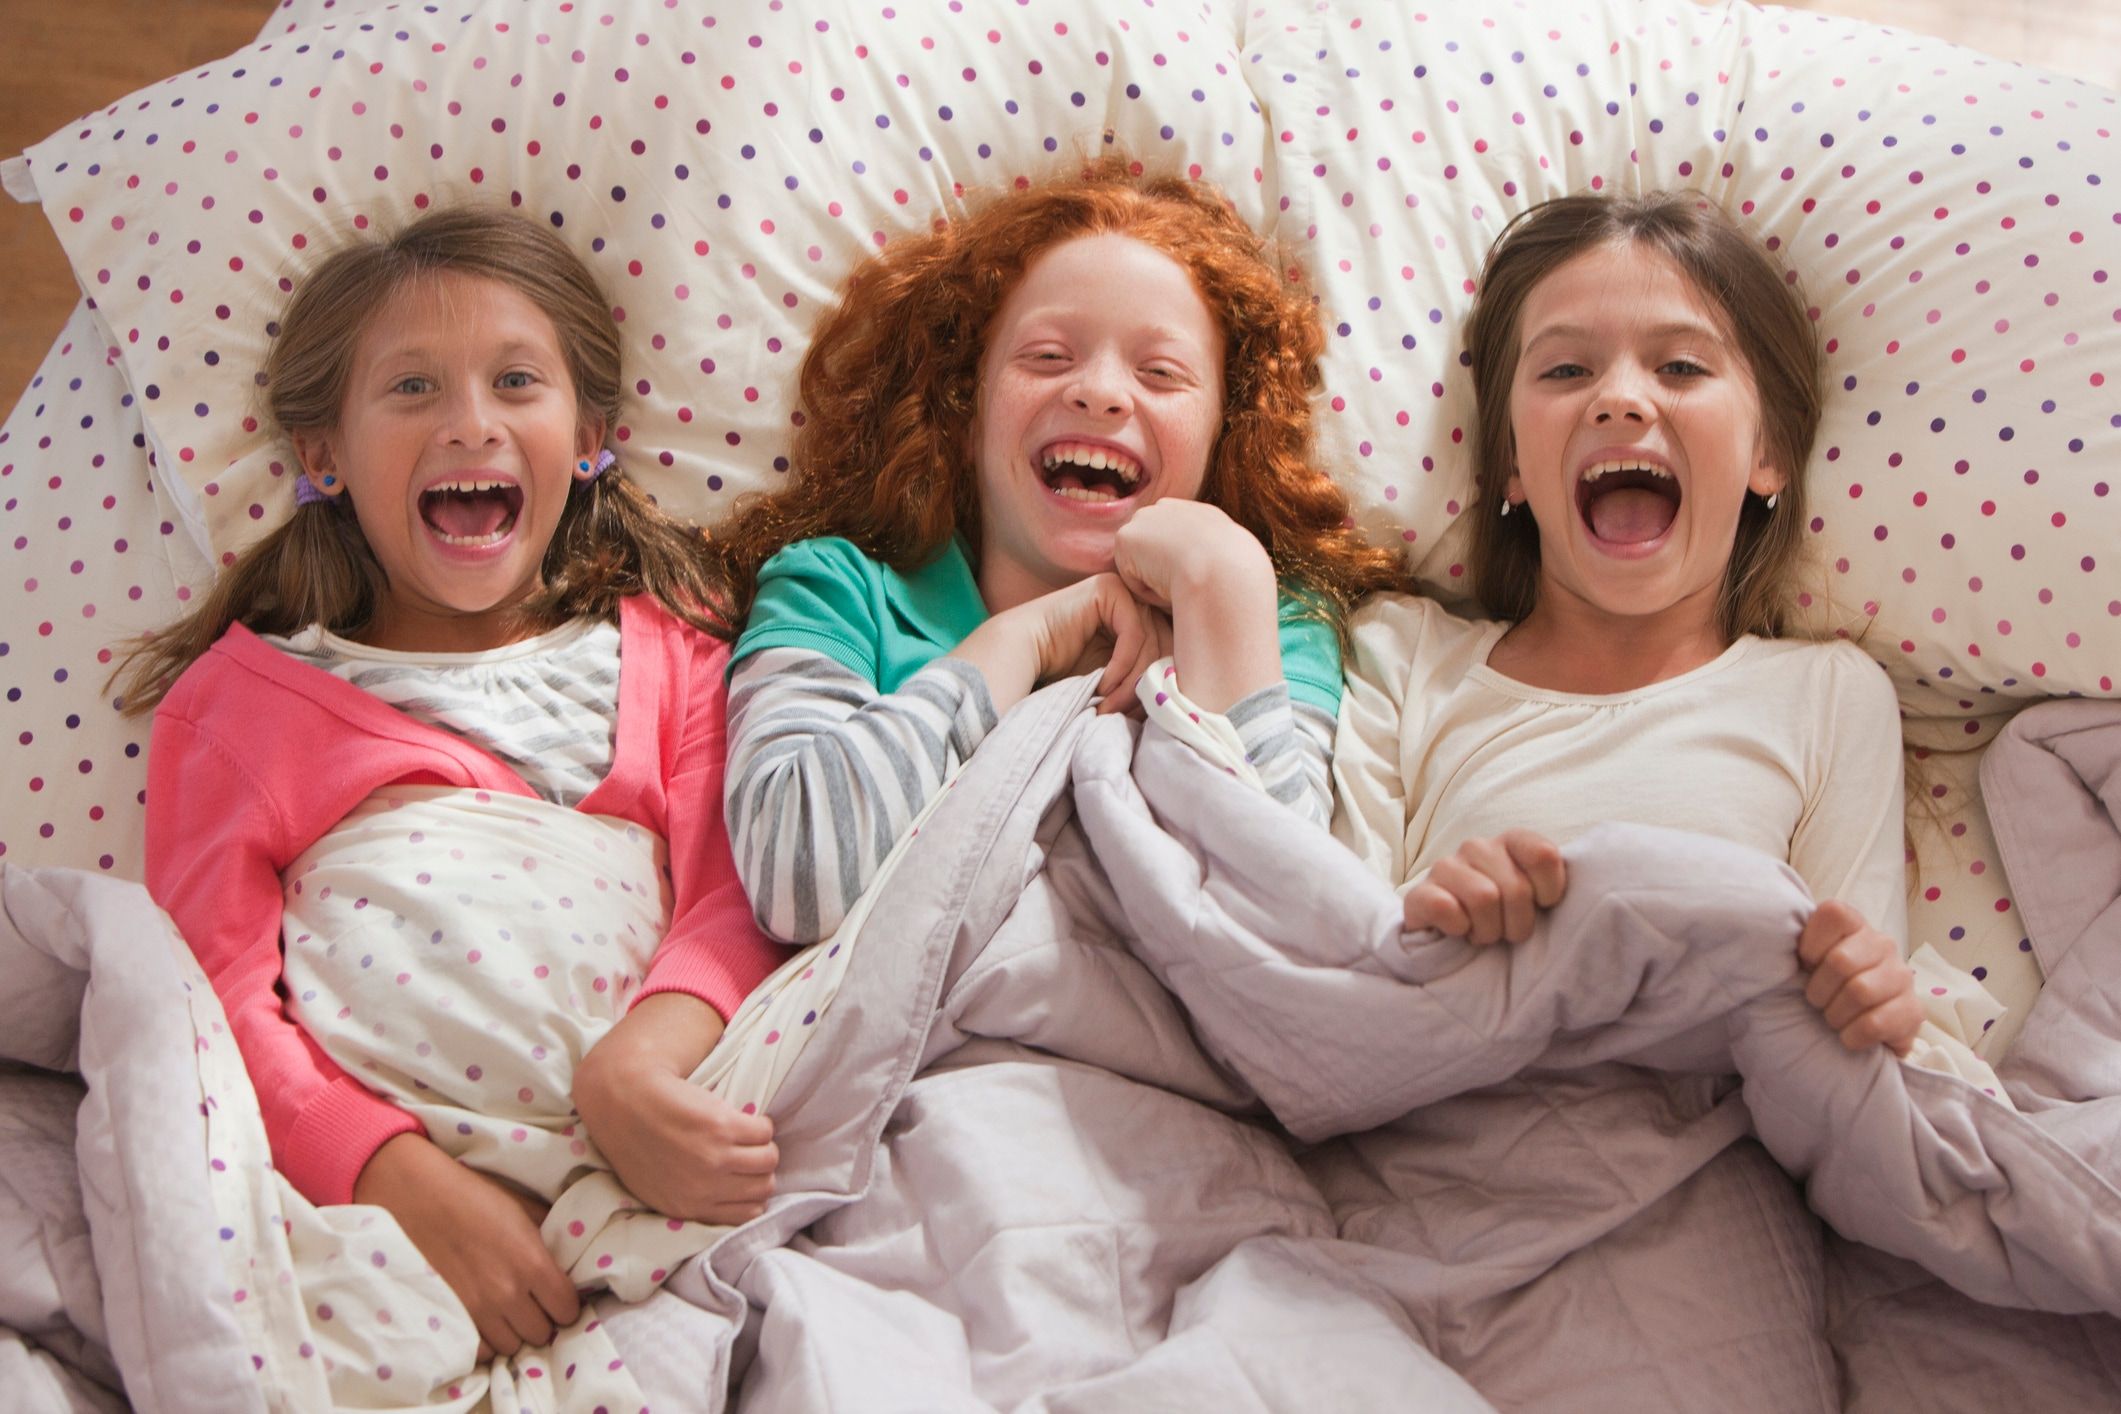 Mom’s 'sleepover contract' for kids has parents freaking out